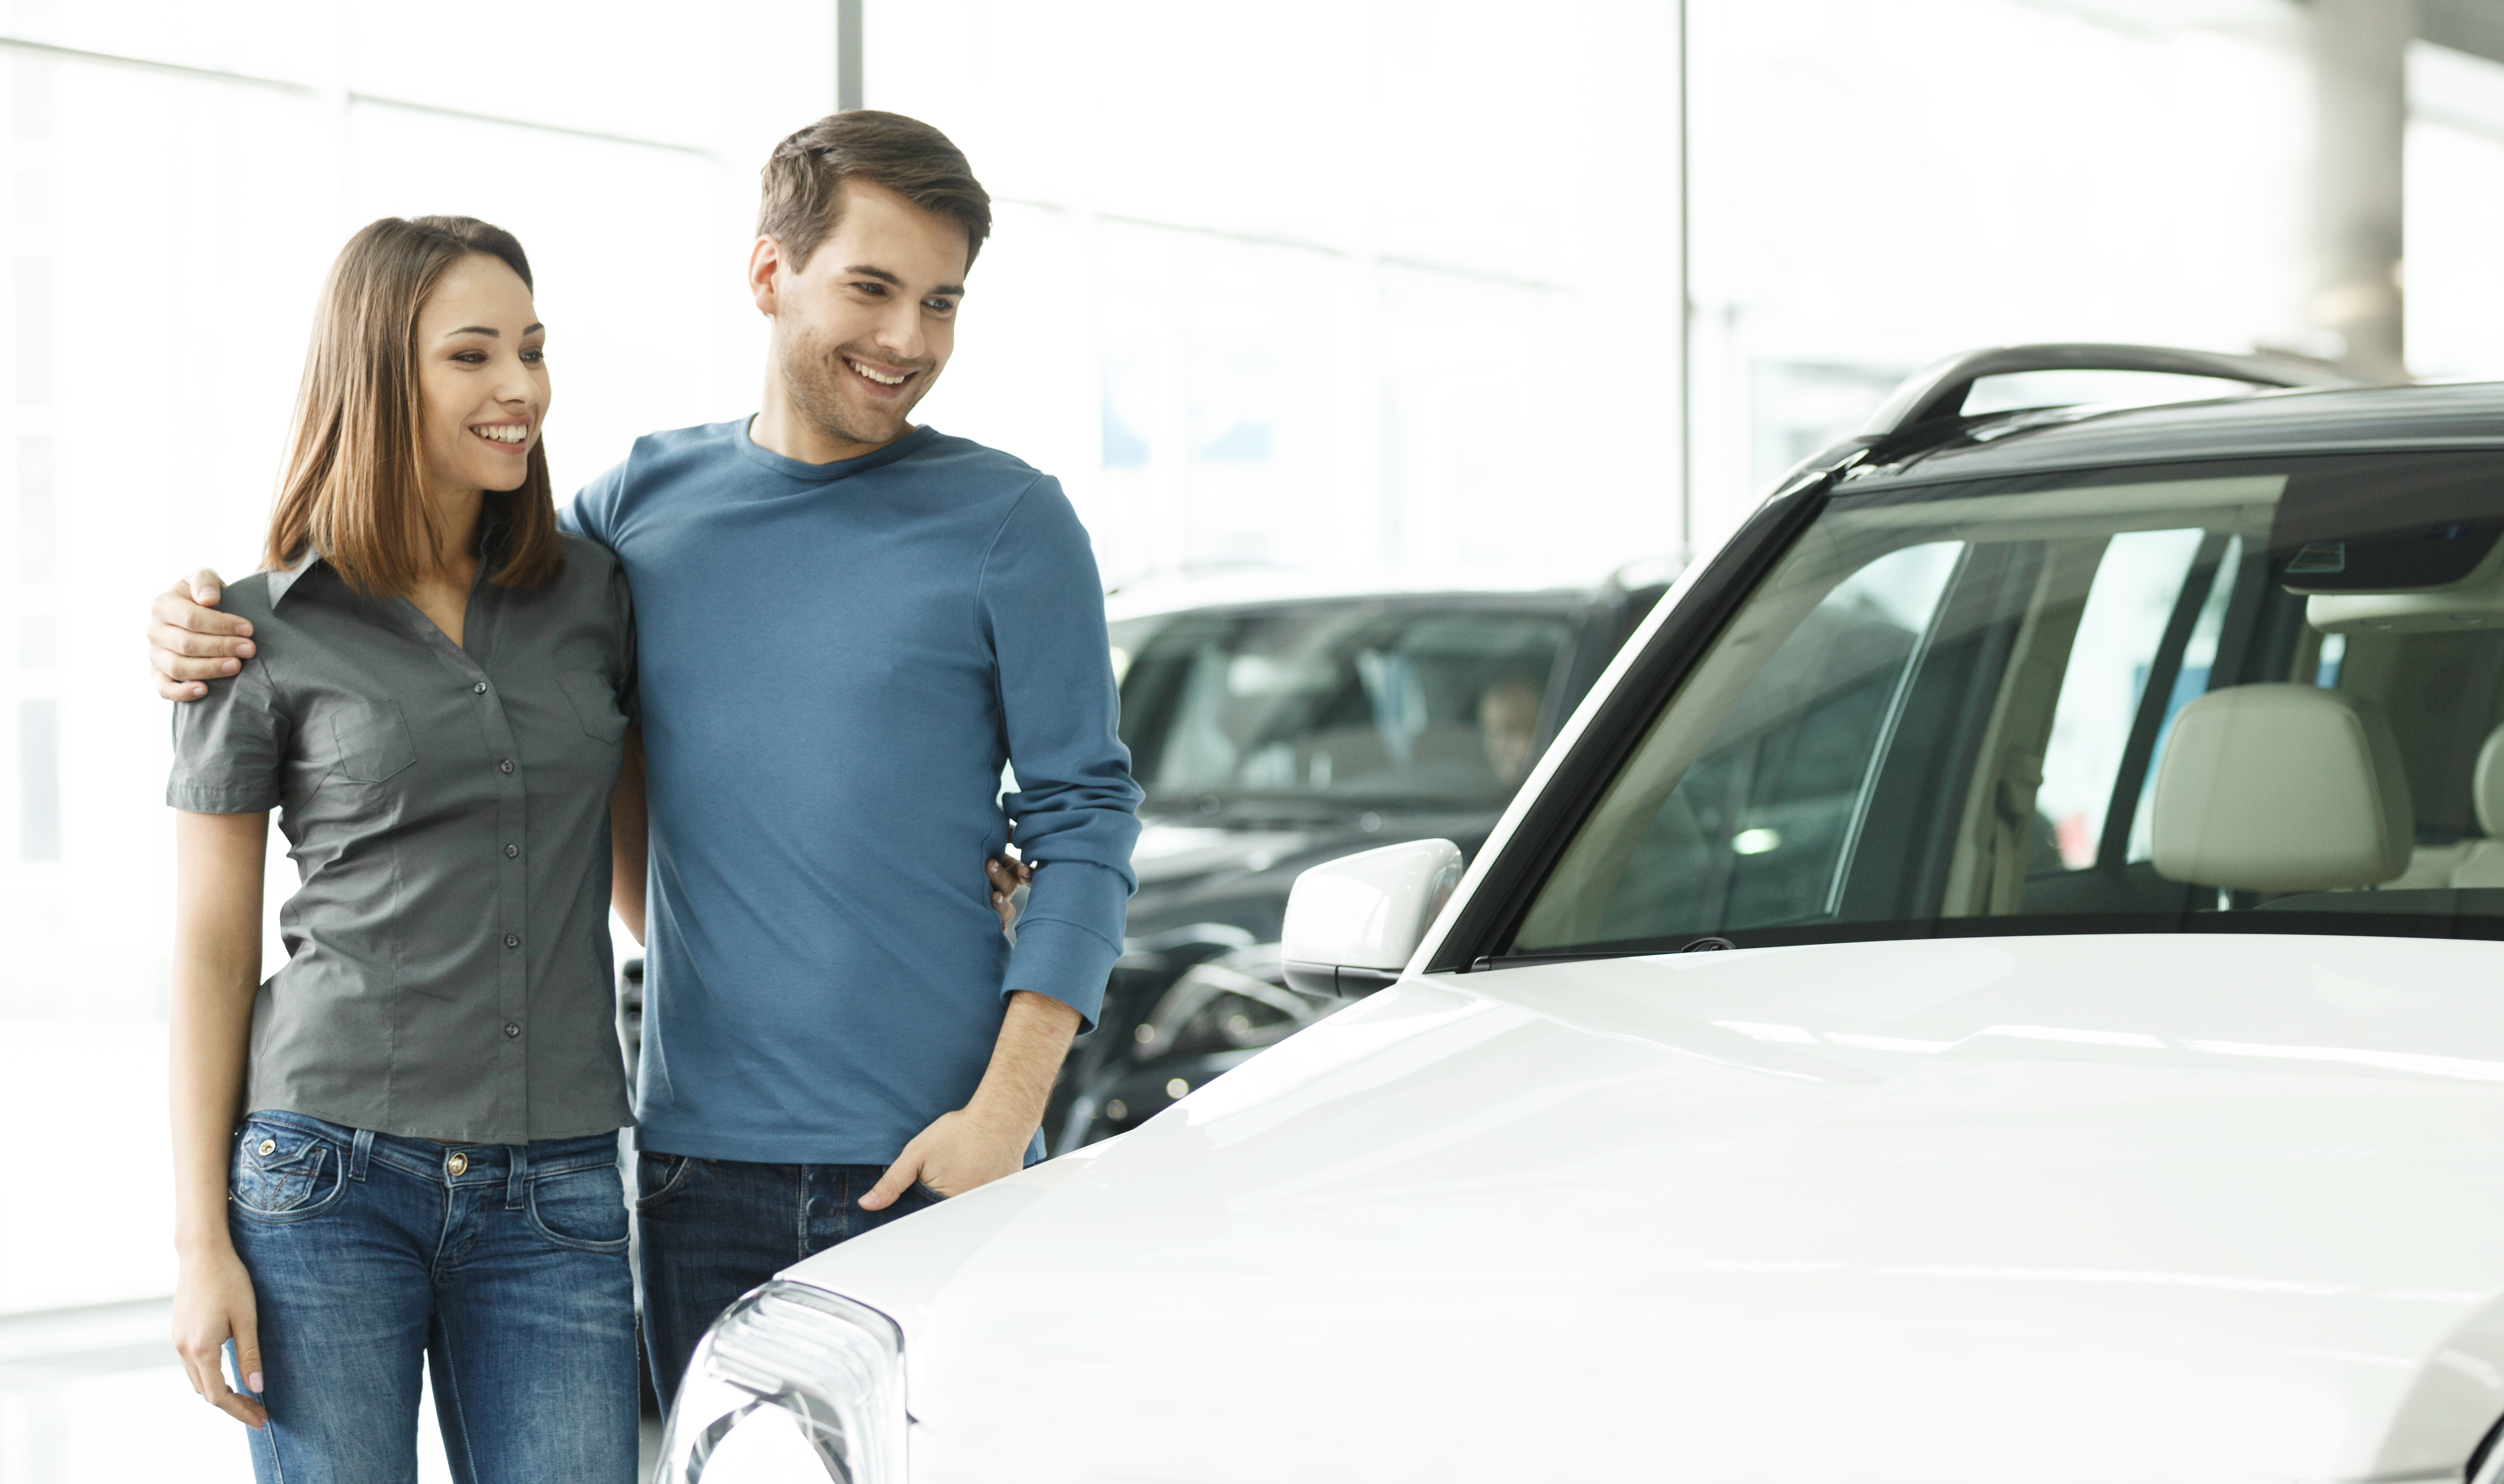 When should I start looking for my next vehicle?